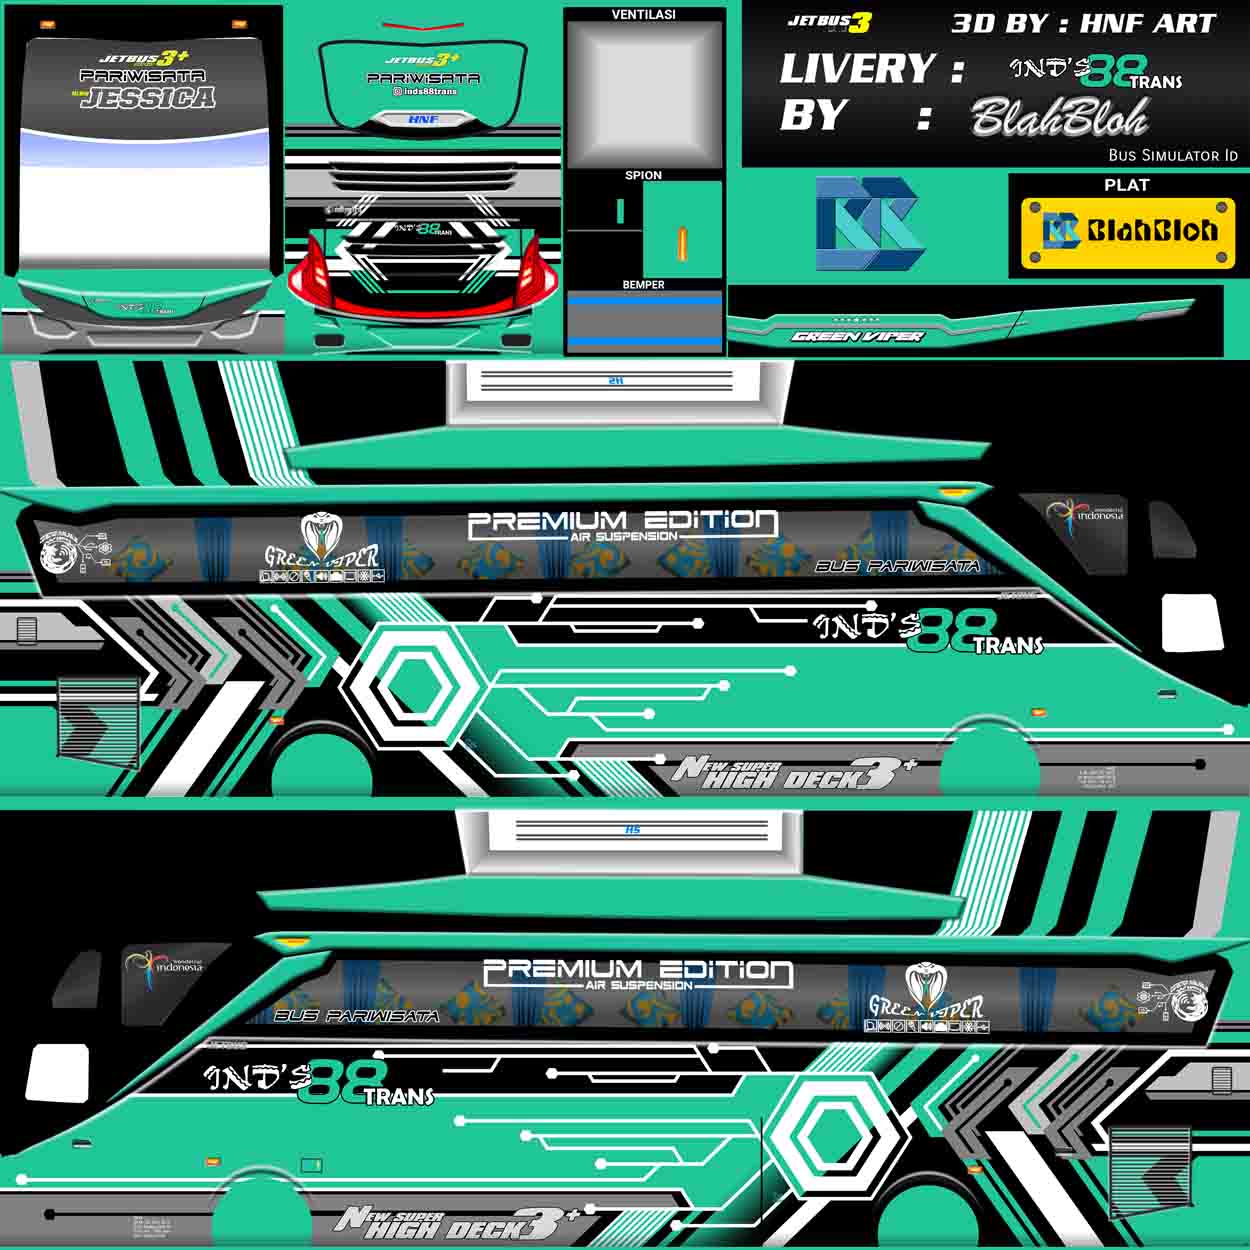 download livery bus inds 88 trans